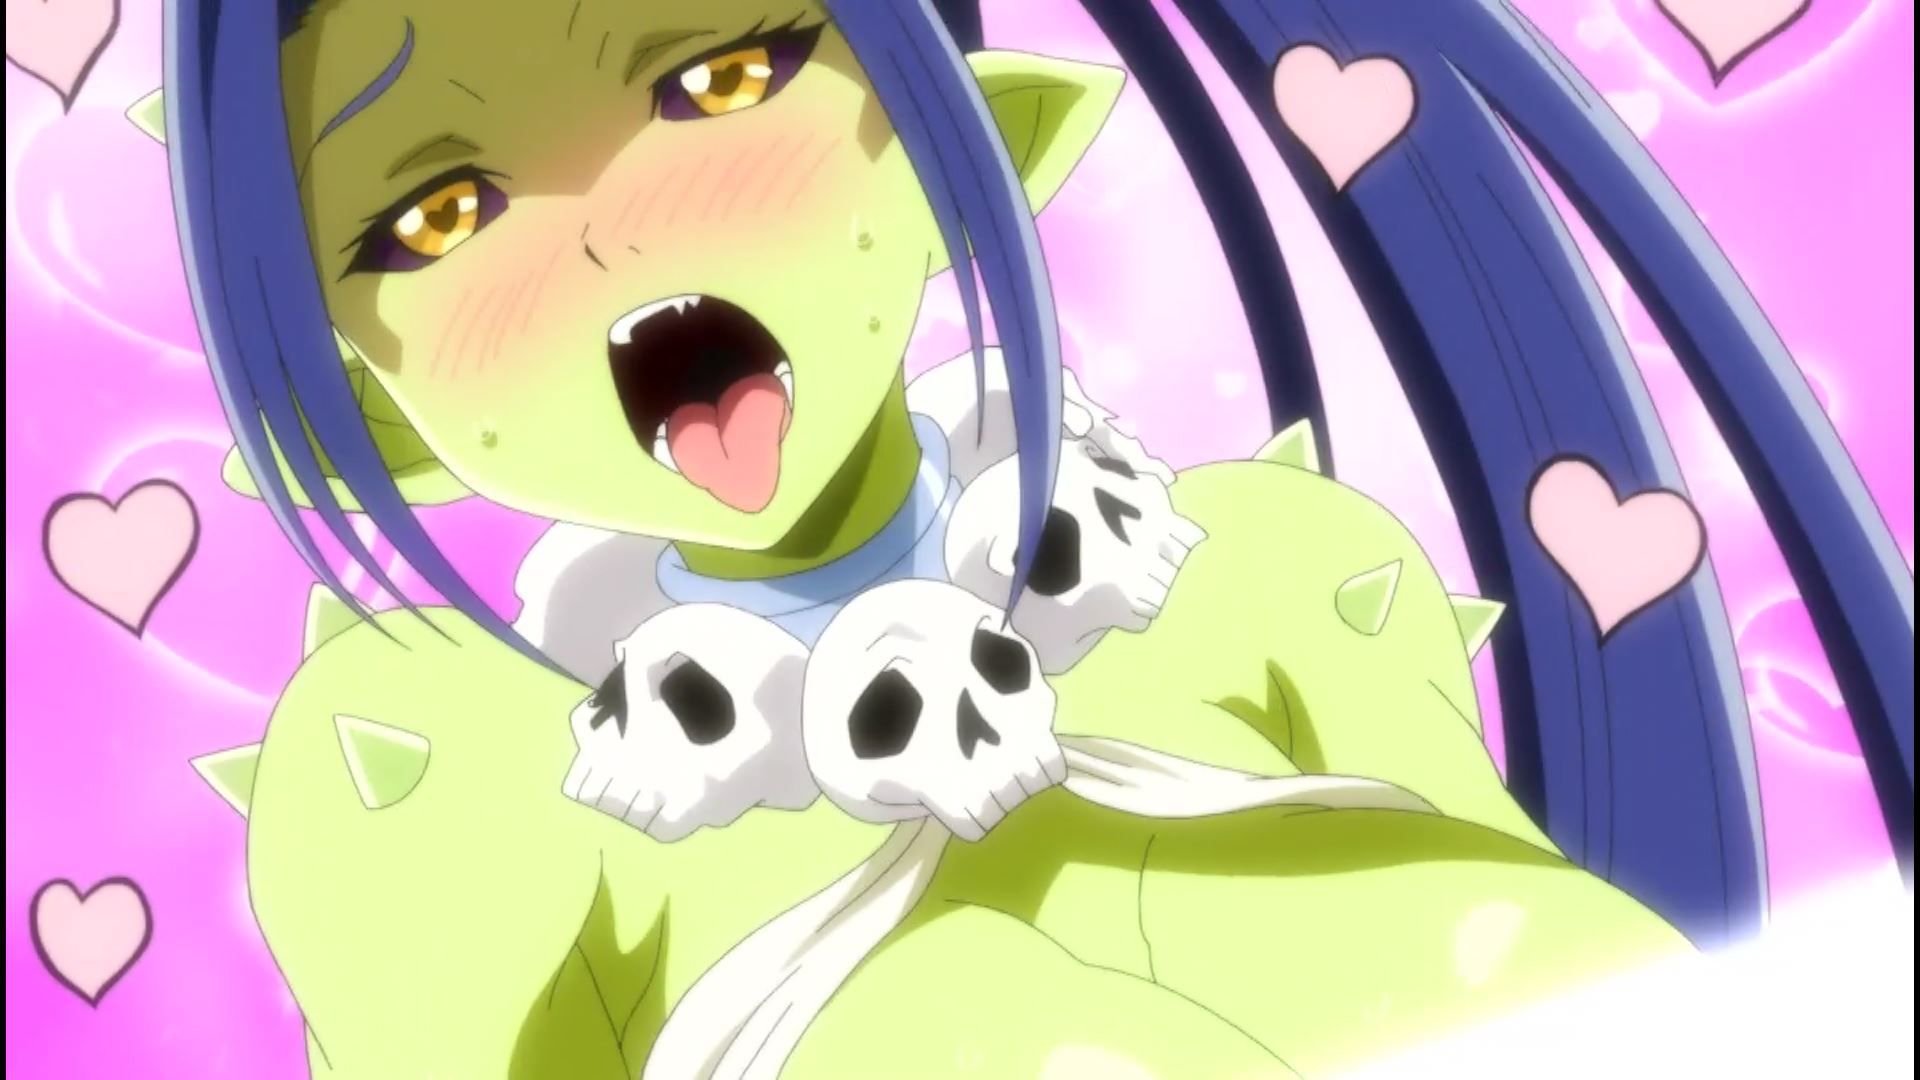 The goblin girl and ecchi scene that got estrus in episode 2 of the second season of the anime "Peter Grill and the Time of the Wise"! 13